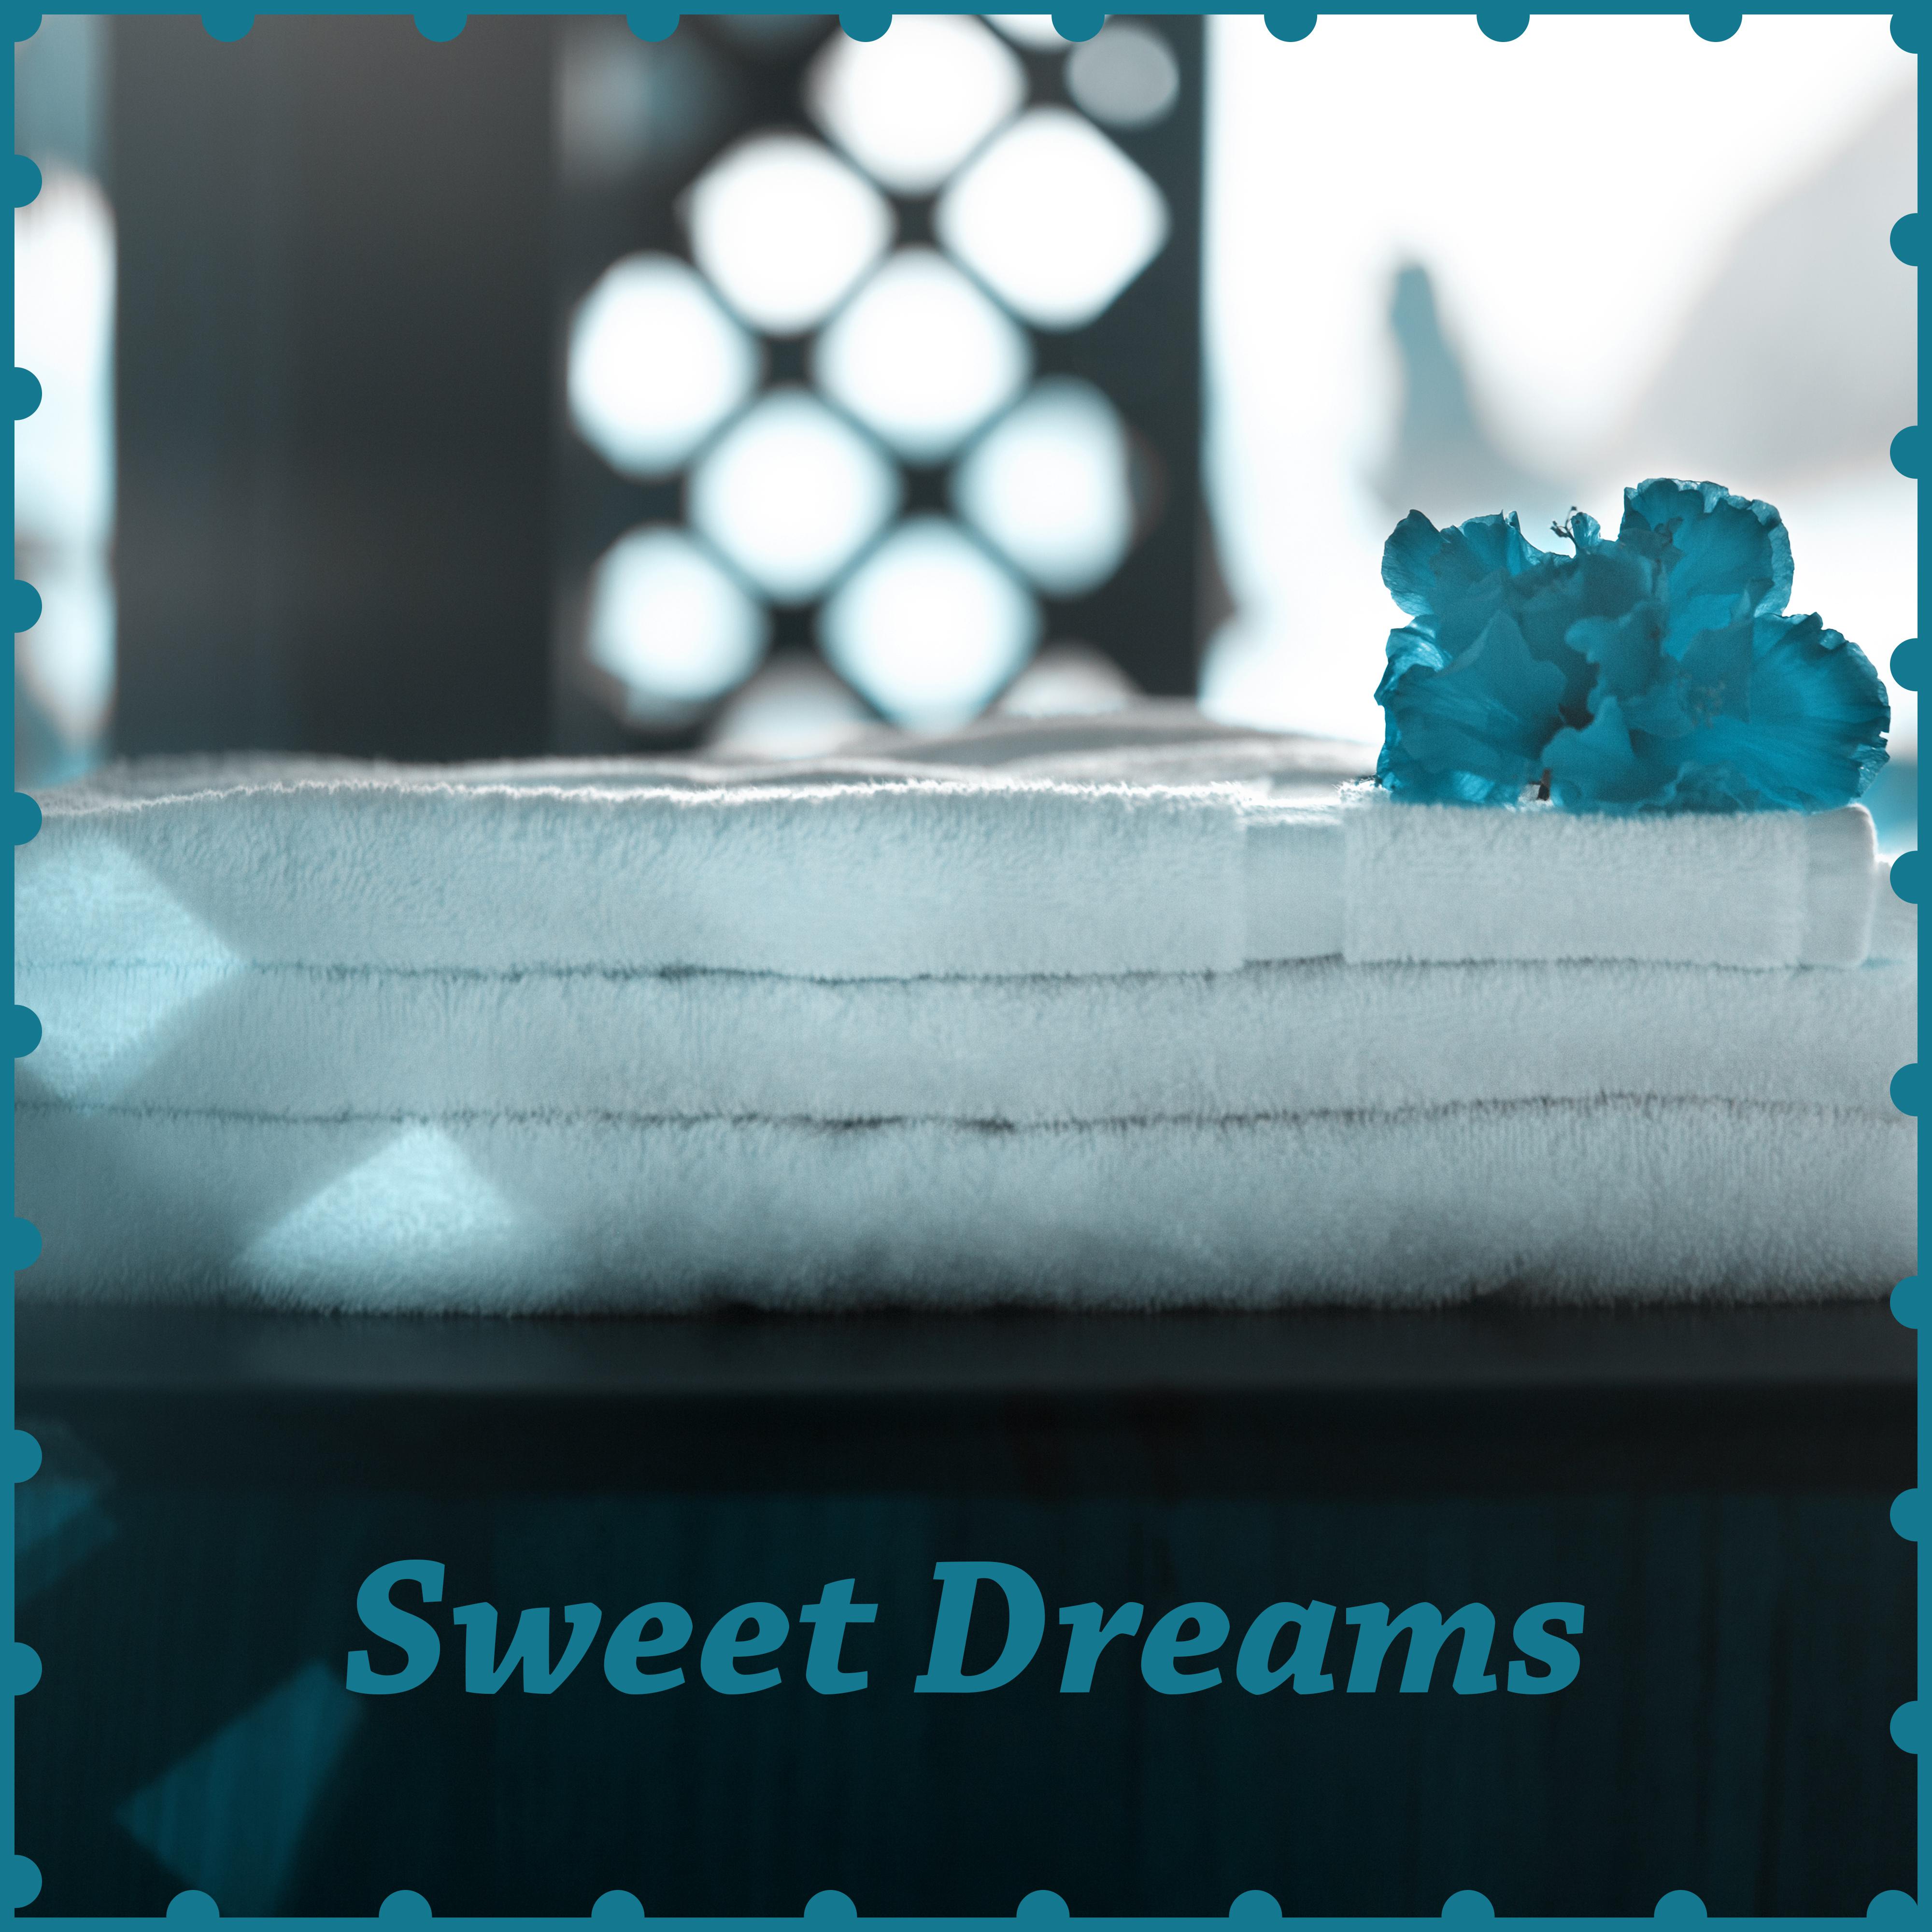 Sweet Dreams  Music for Spa, Wellness, Healing Sounds for Relaxation, Therapy in Spa, Deep Sleep, Restful Melodies